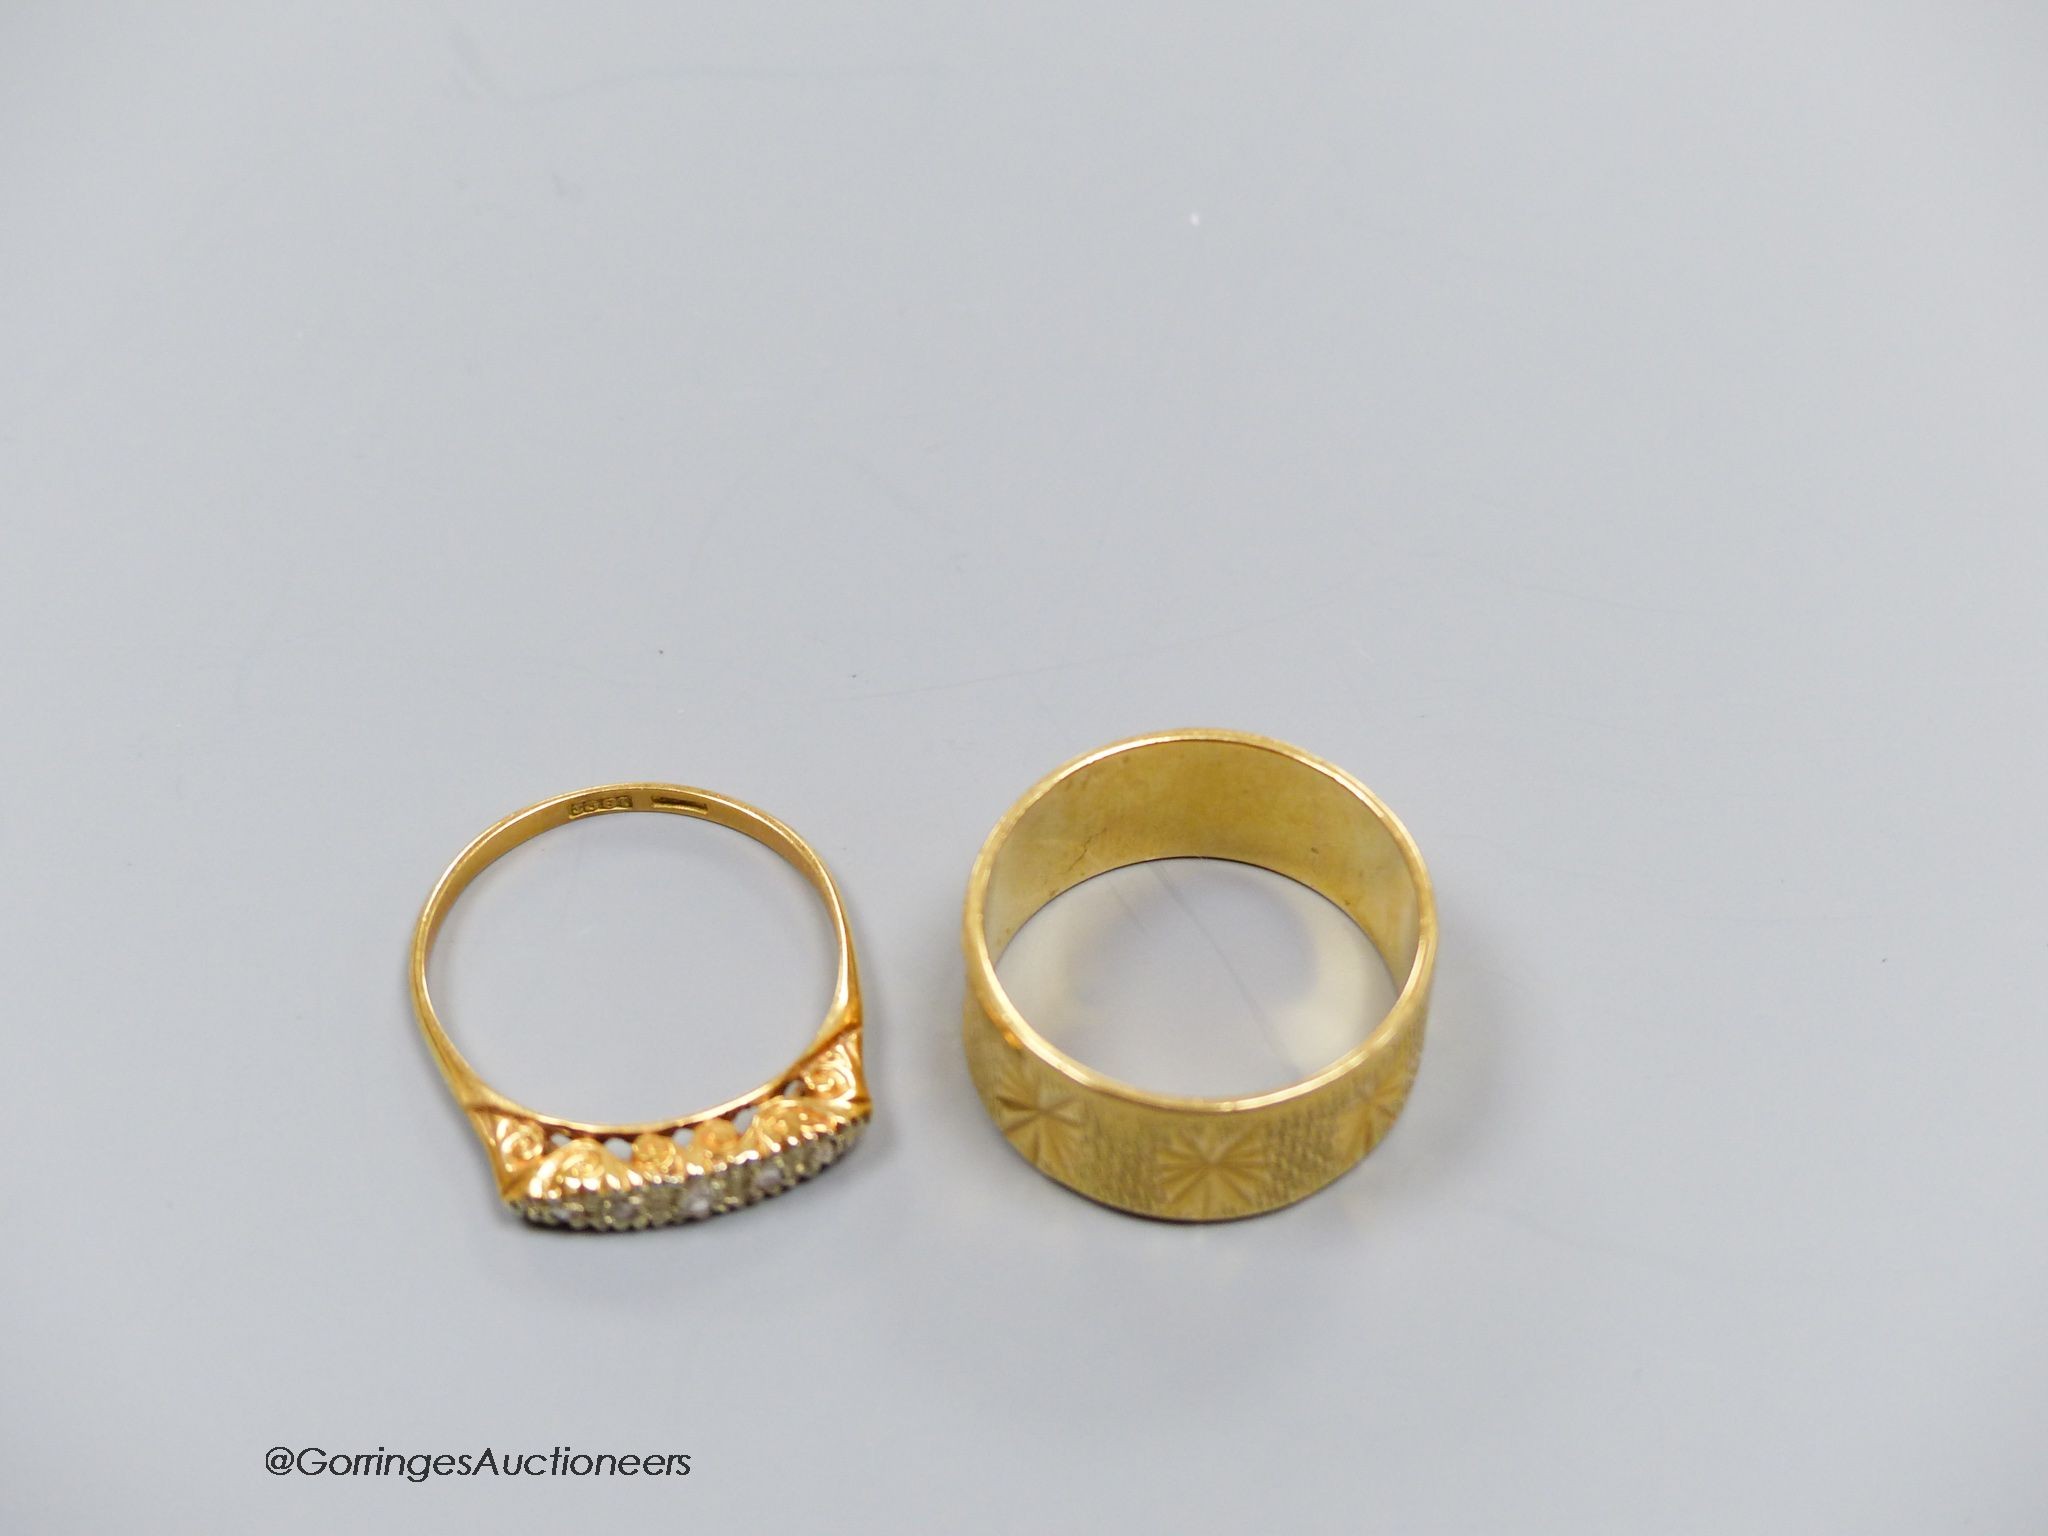 An 18ct engraved gold ring, size Q, 7.1g, and another 18ct gold and diamond ring with scroll-carved mount, size Q, gross 2.8g. 9.9g